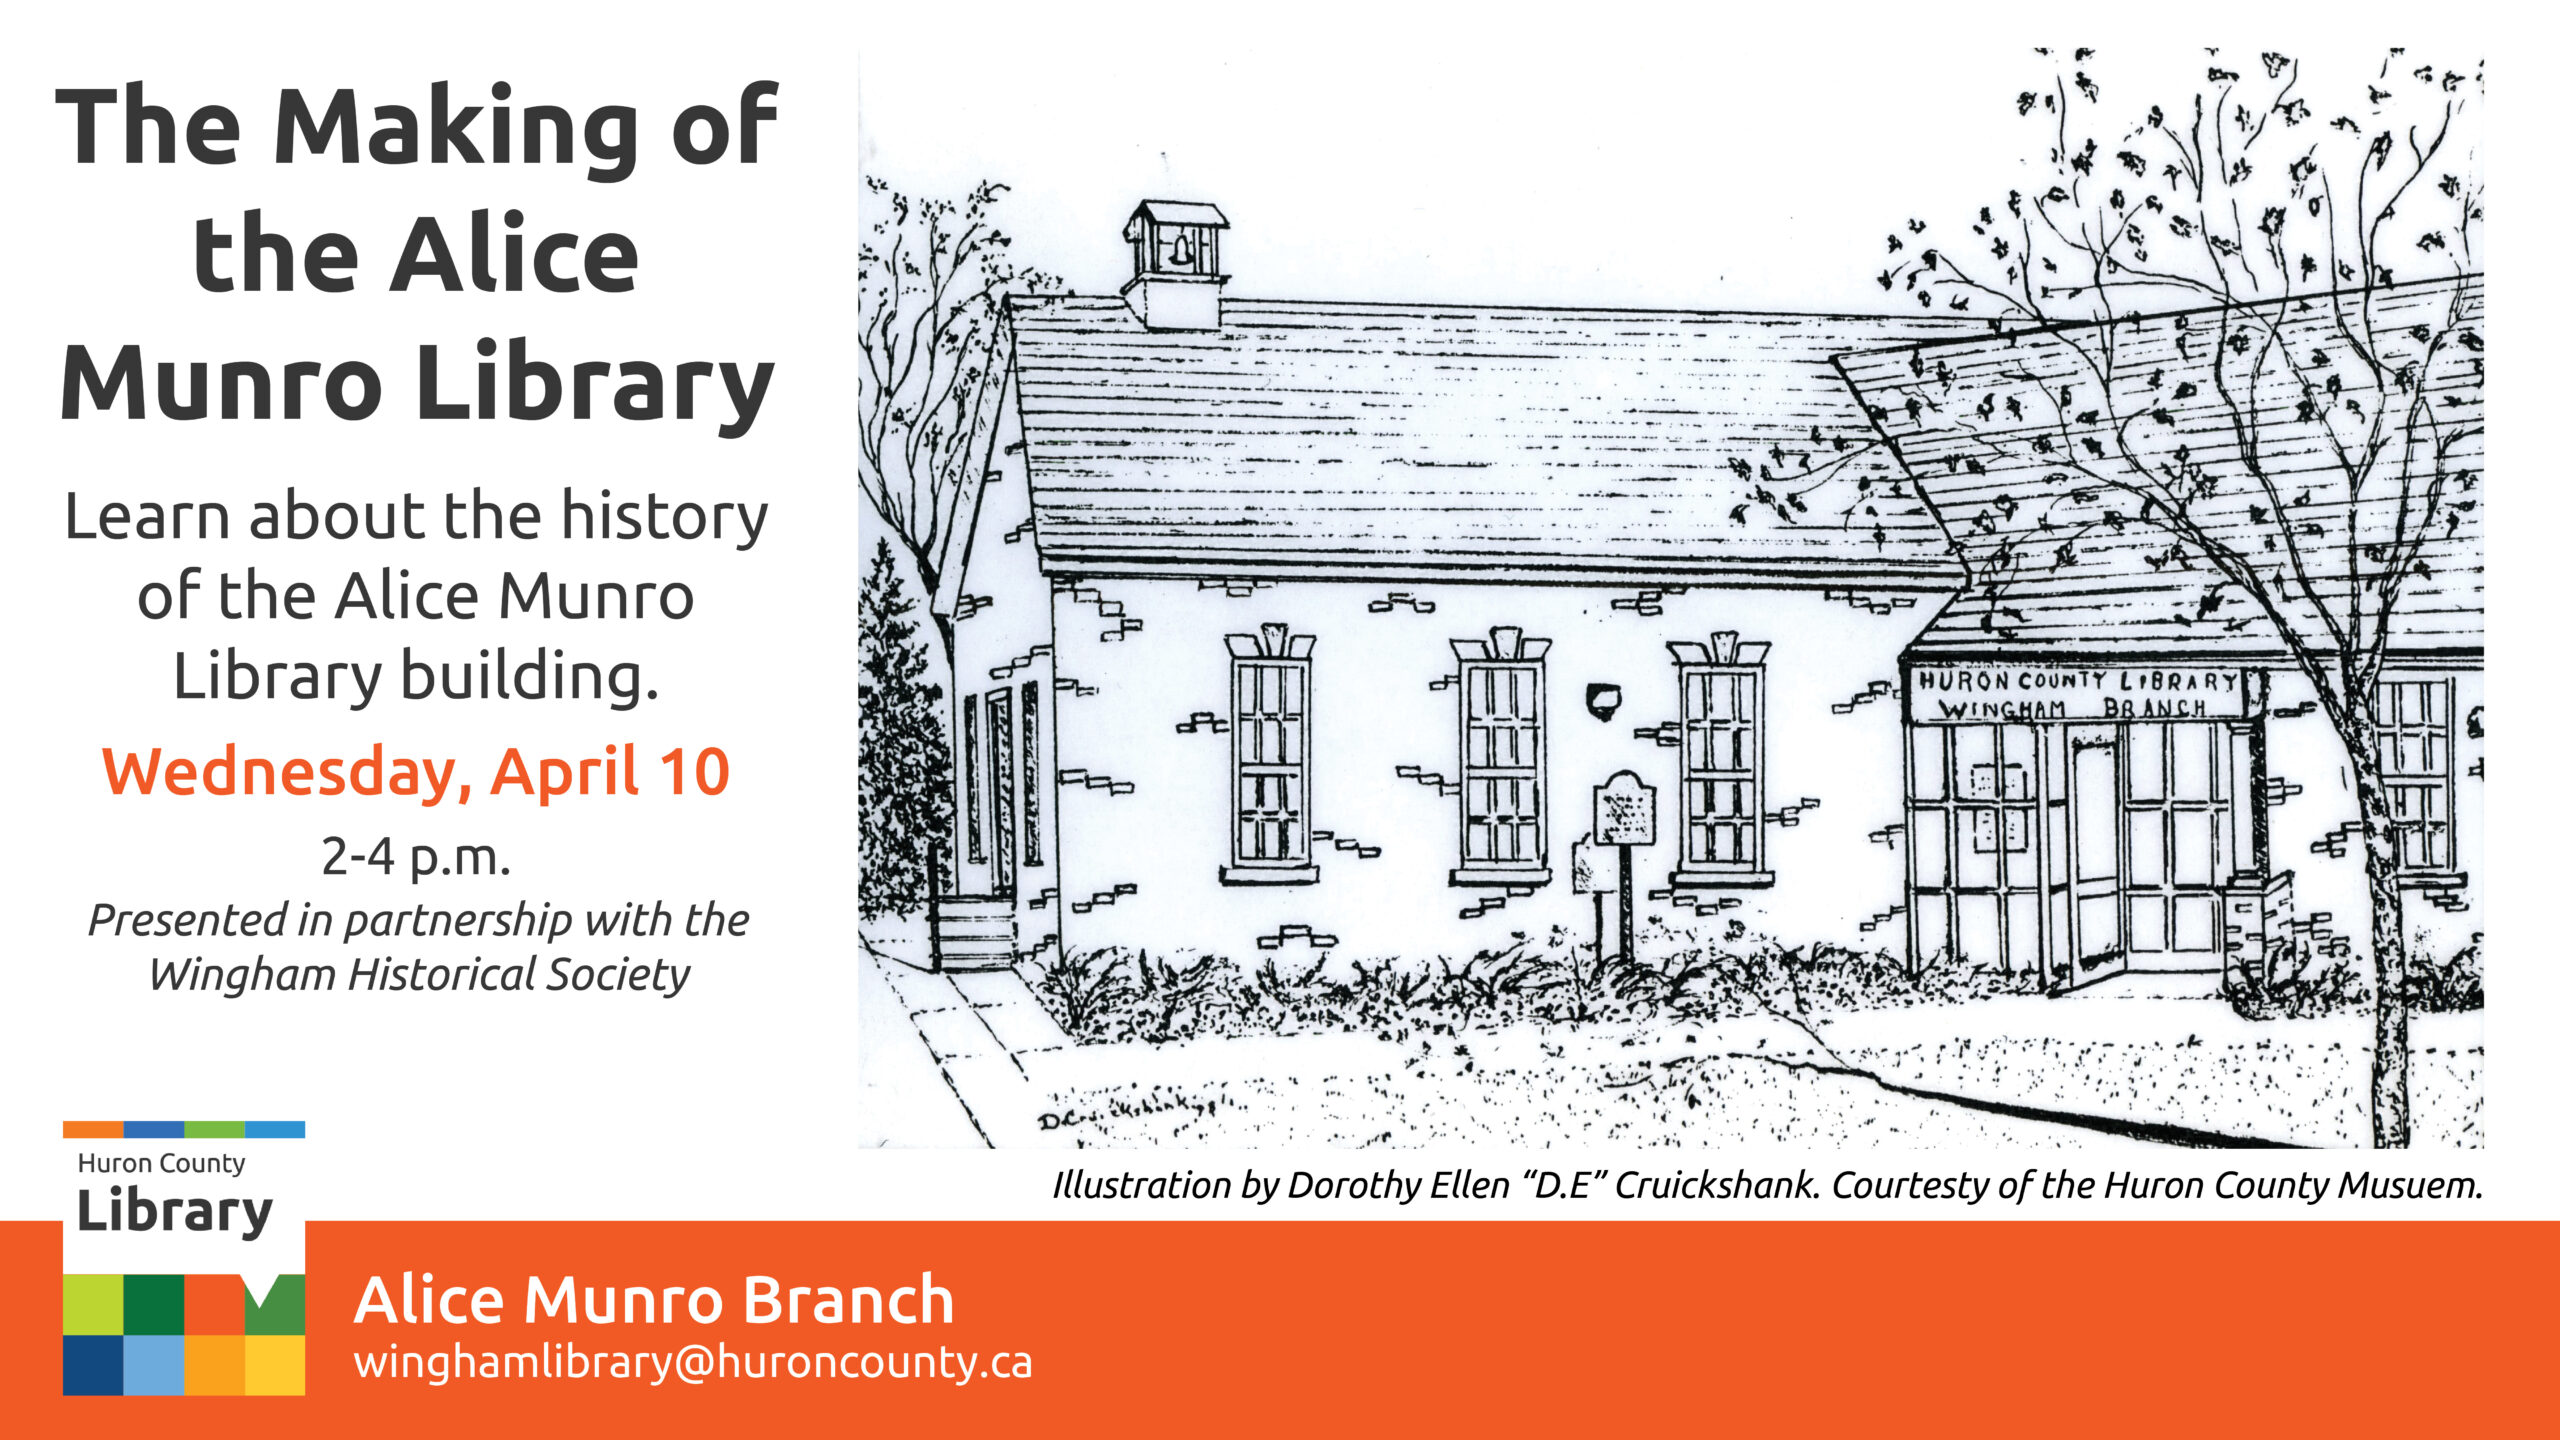 Illustration of the Alice Munro Library Branch with text promoting talk about the history of the building in Wingham